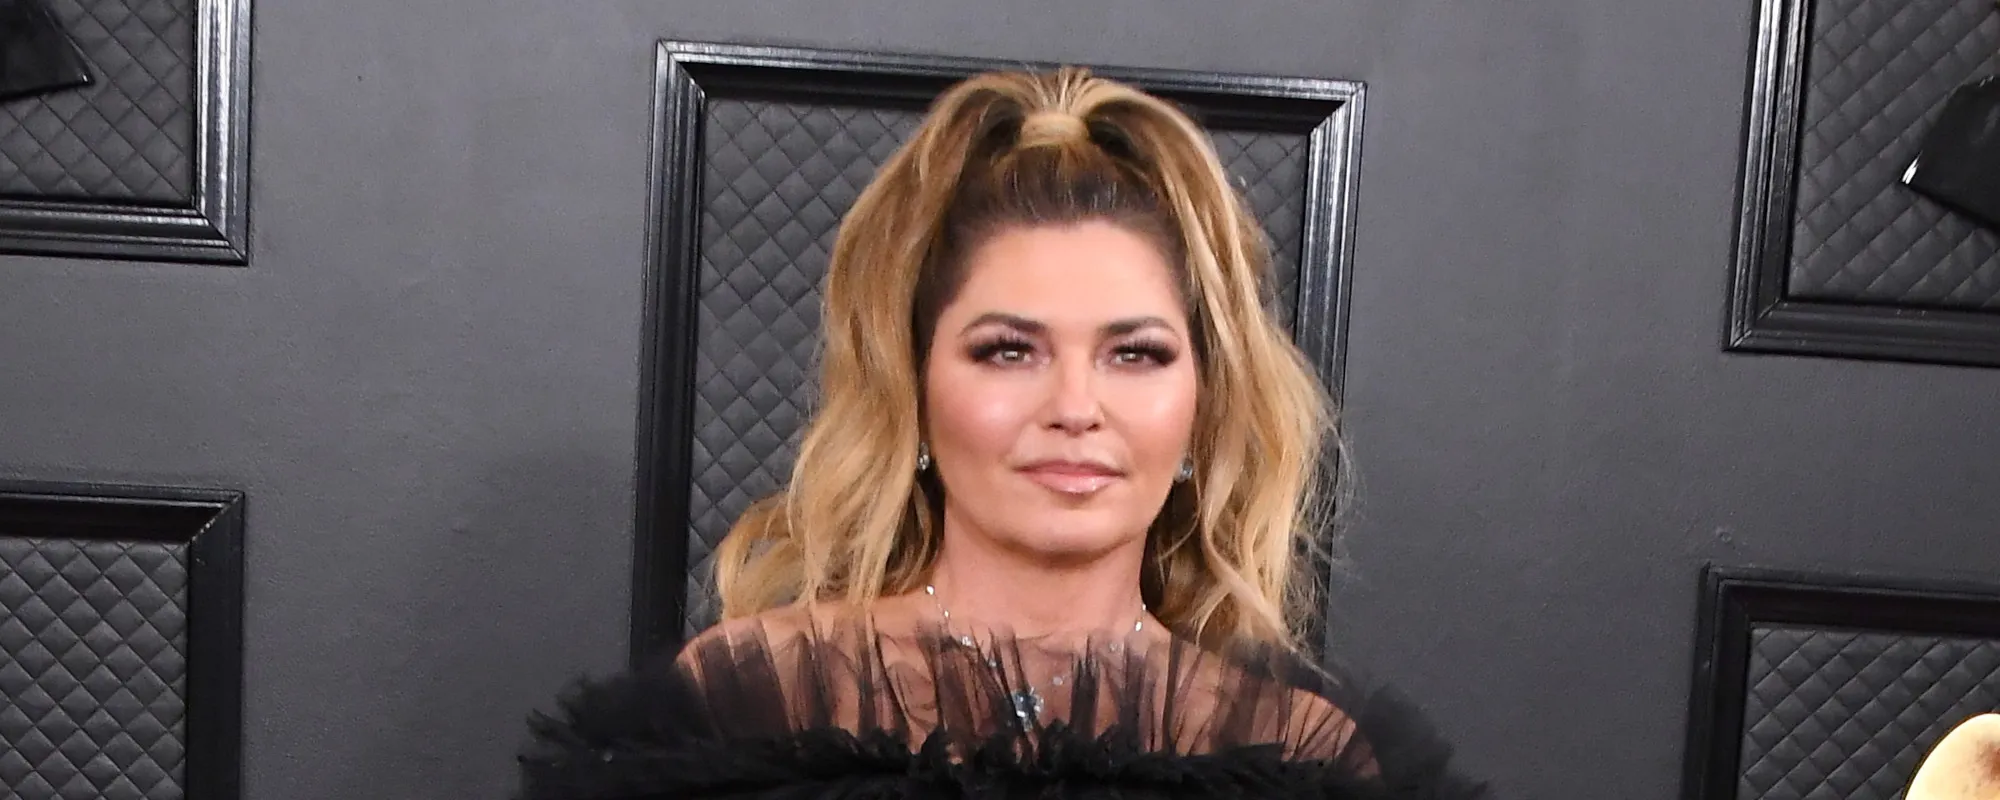 Shania Twain Releases New Song and Music Video, “Waking Up Dreaming”